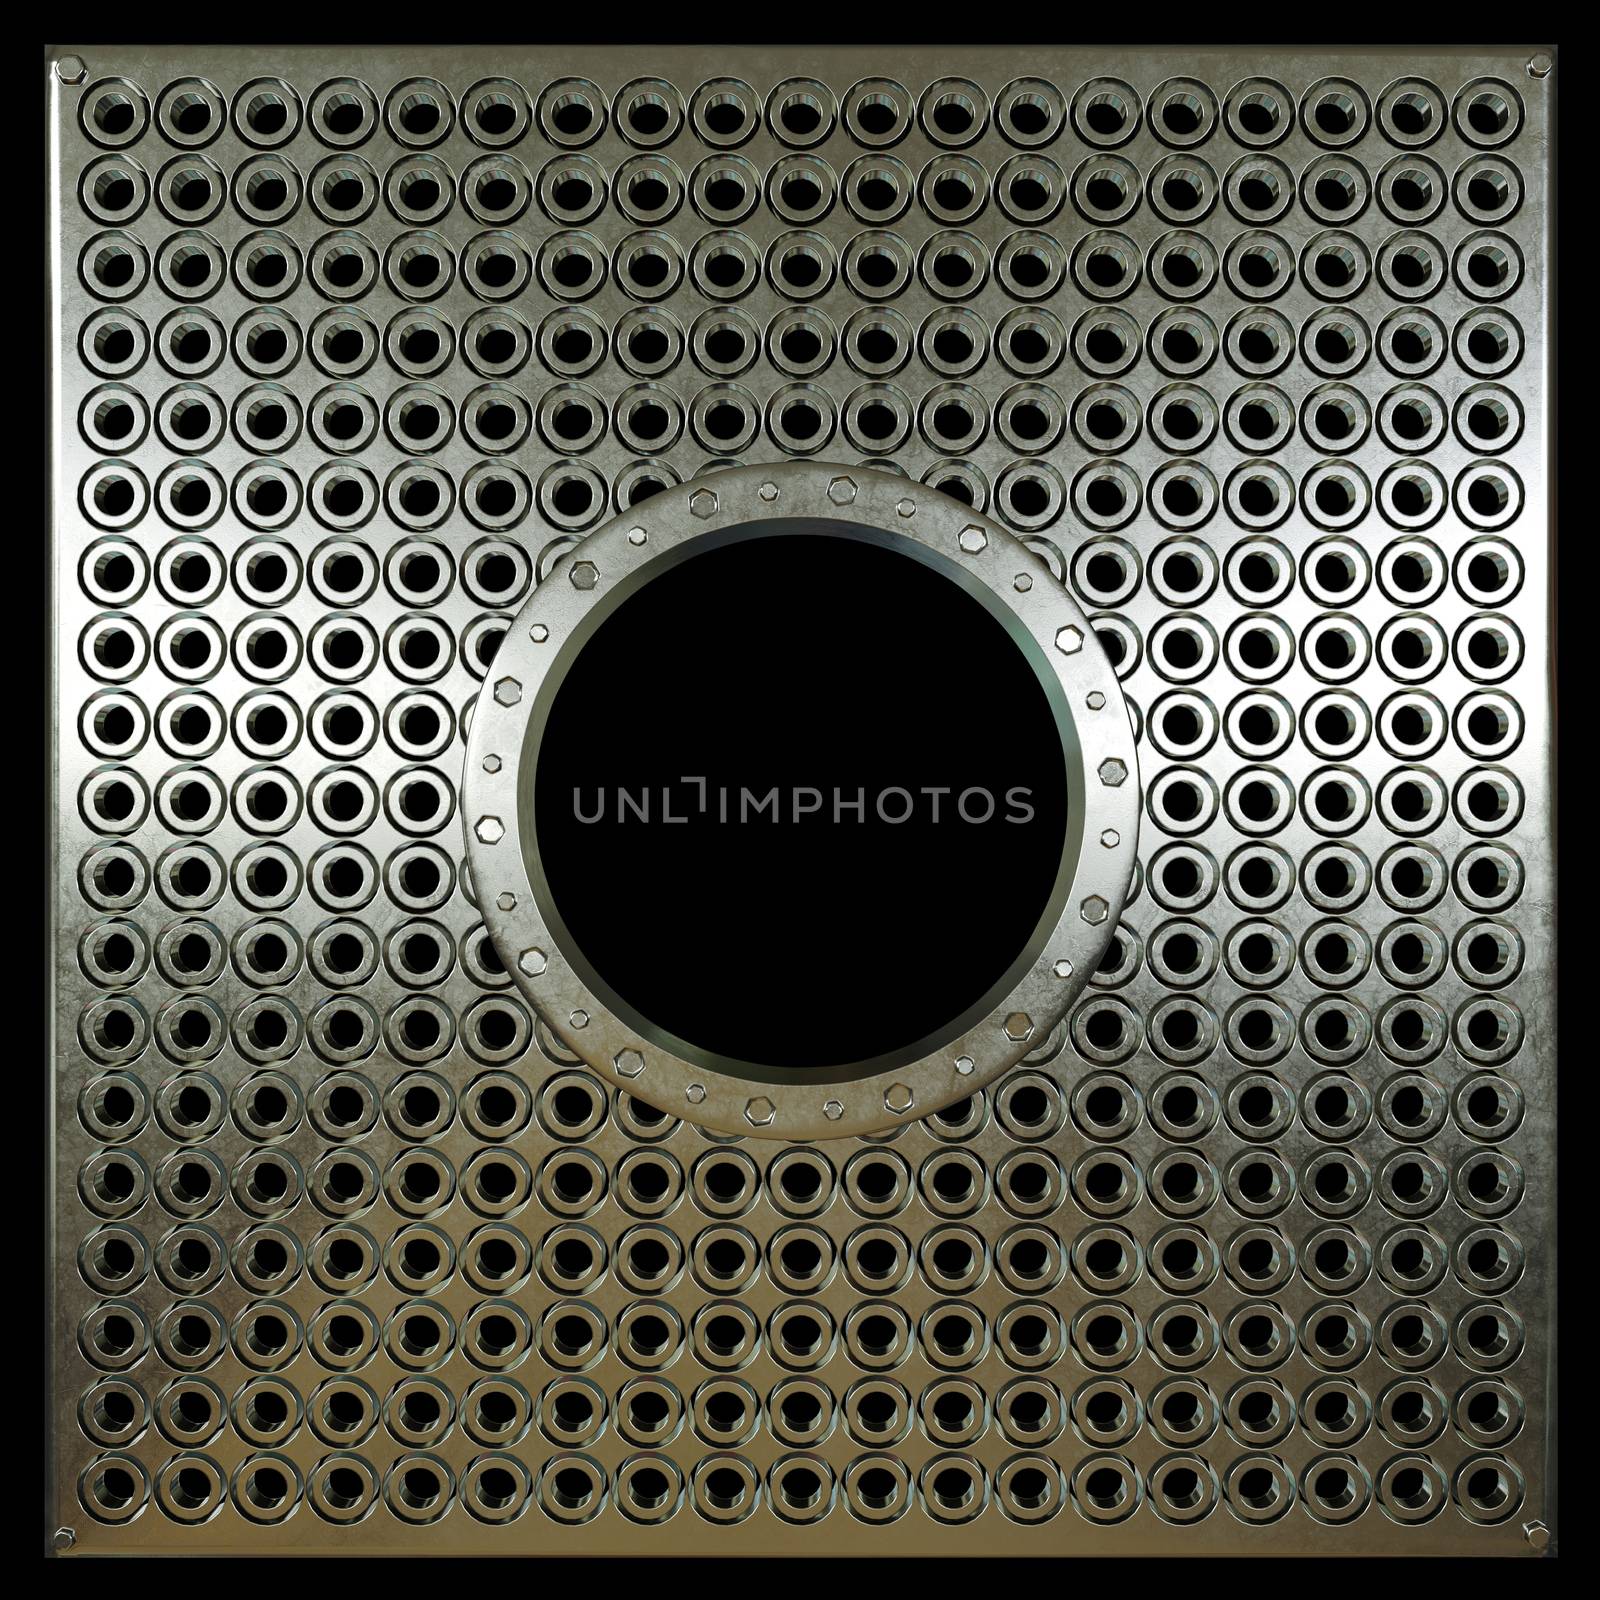 metal plate with holes on isolate black concept photo by denisgo